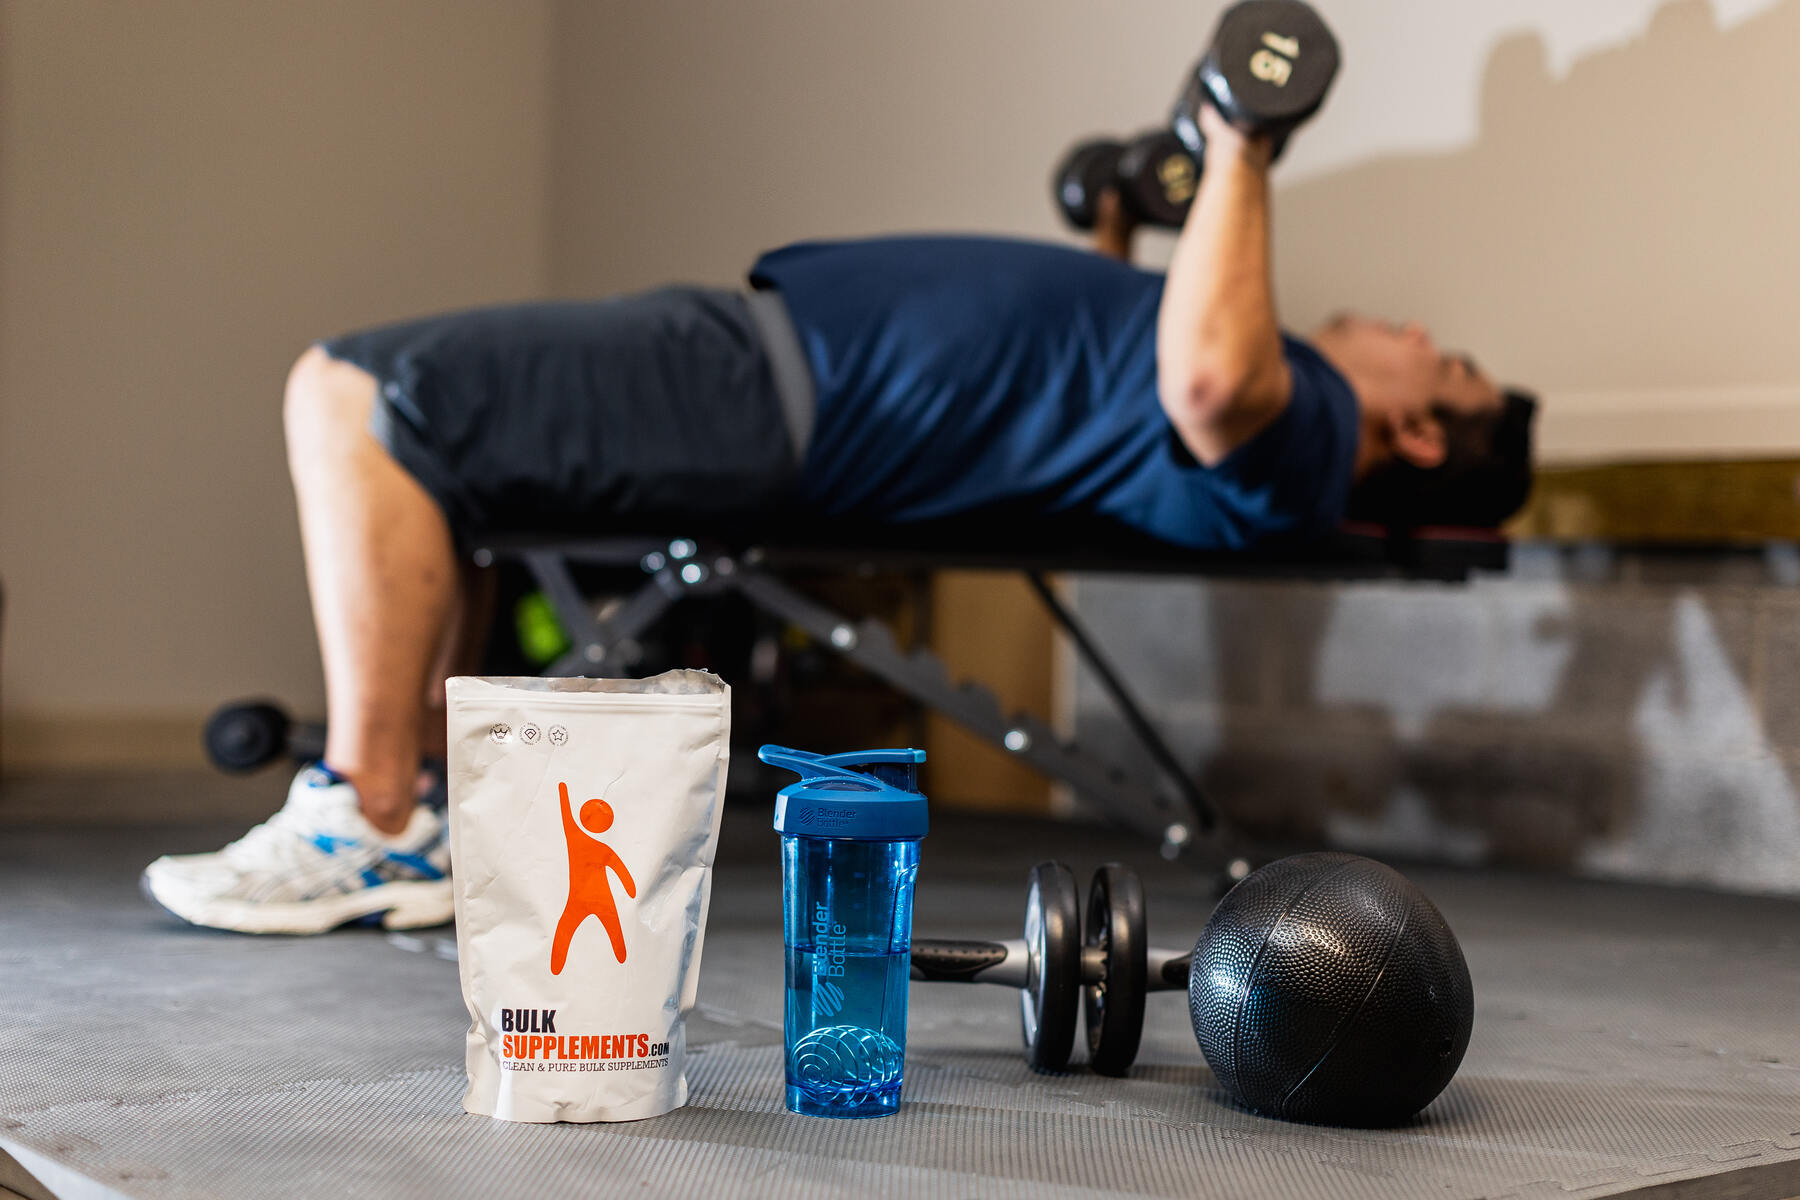 Bulk Supplements bag next to a water bottle and fitness equipment with a man lifting weights in the background